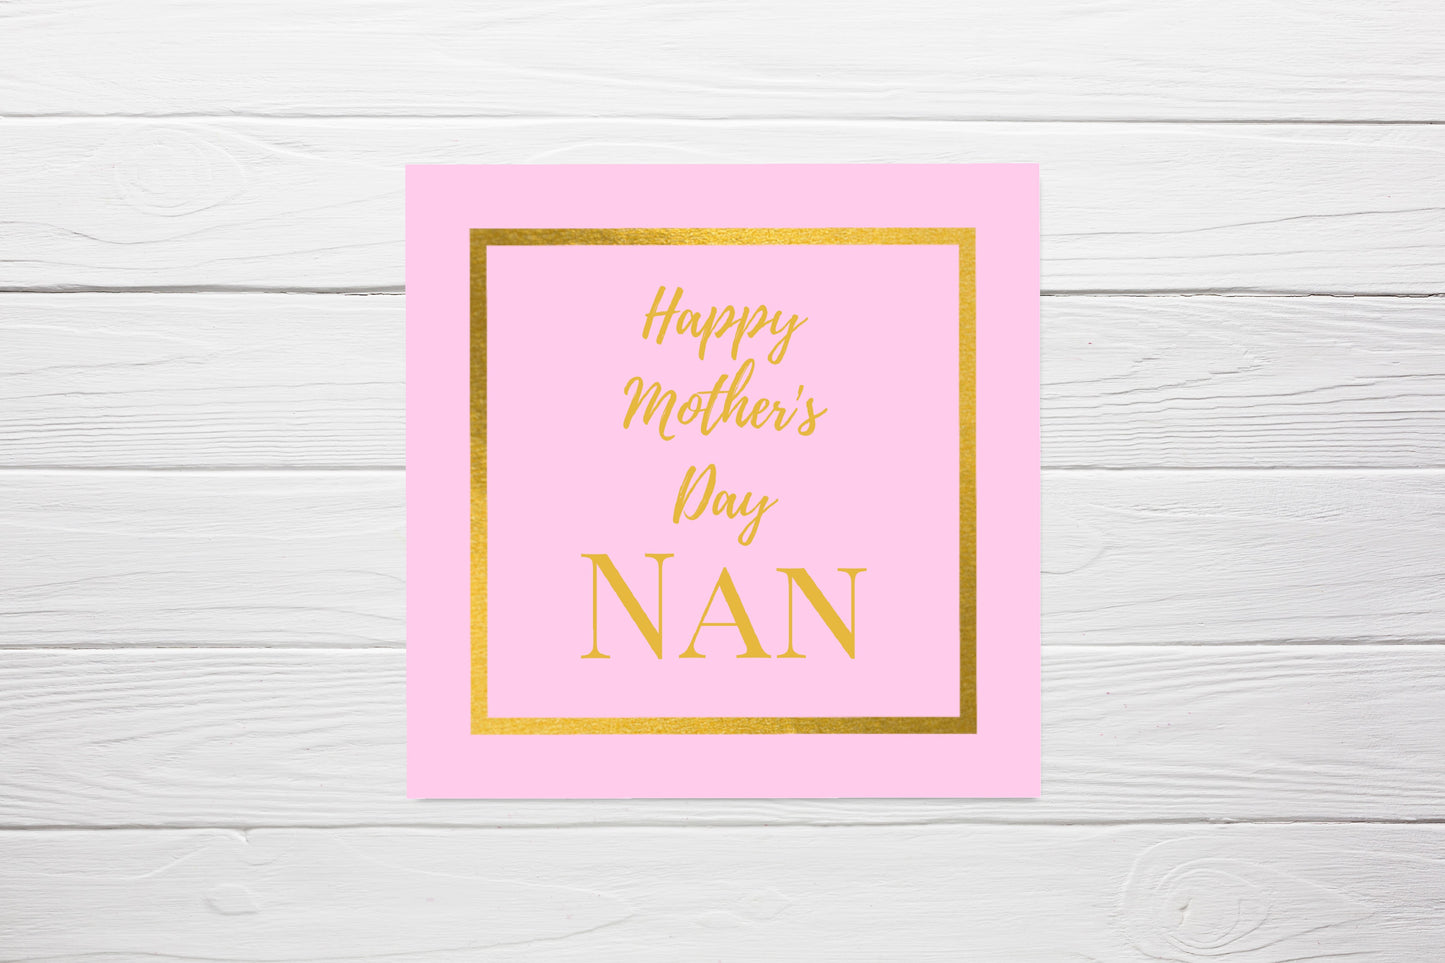 Mother's Day Card | Happy Mother's Day Nan | Pink Card | Cute Card